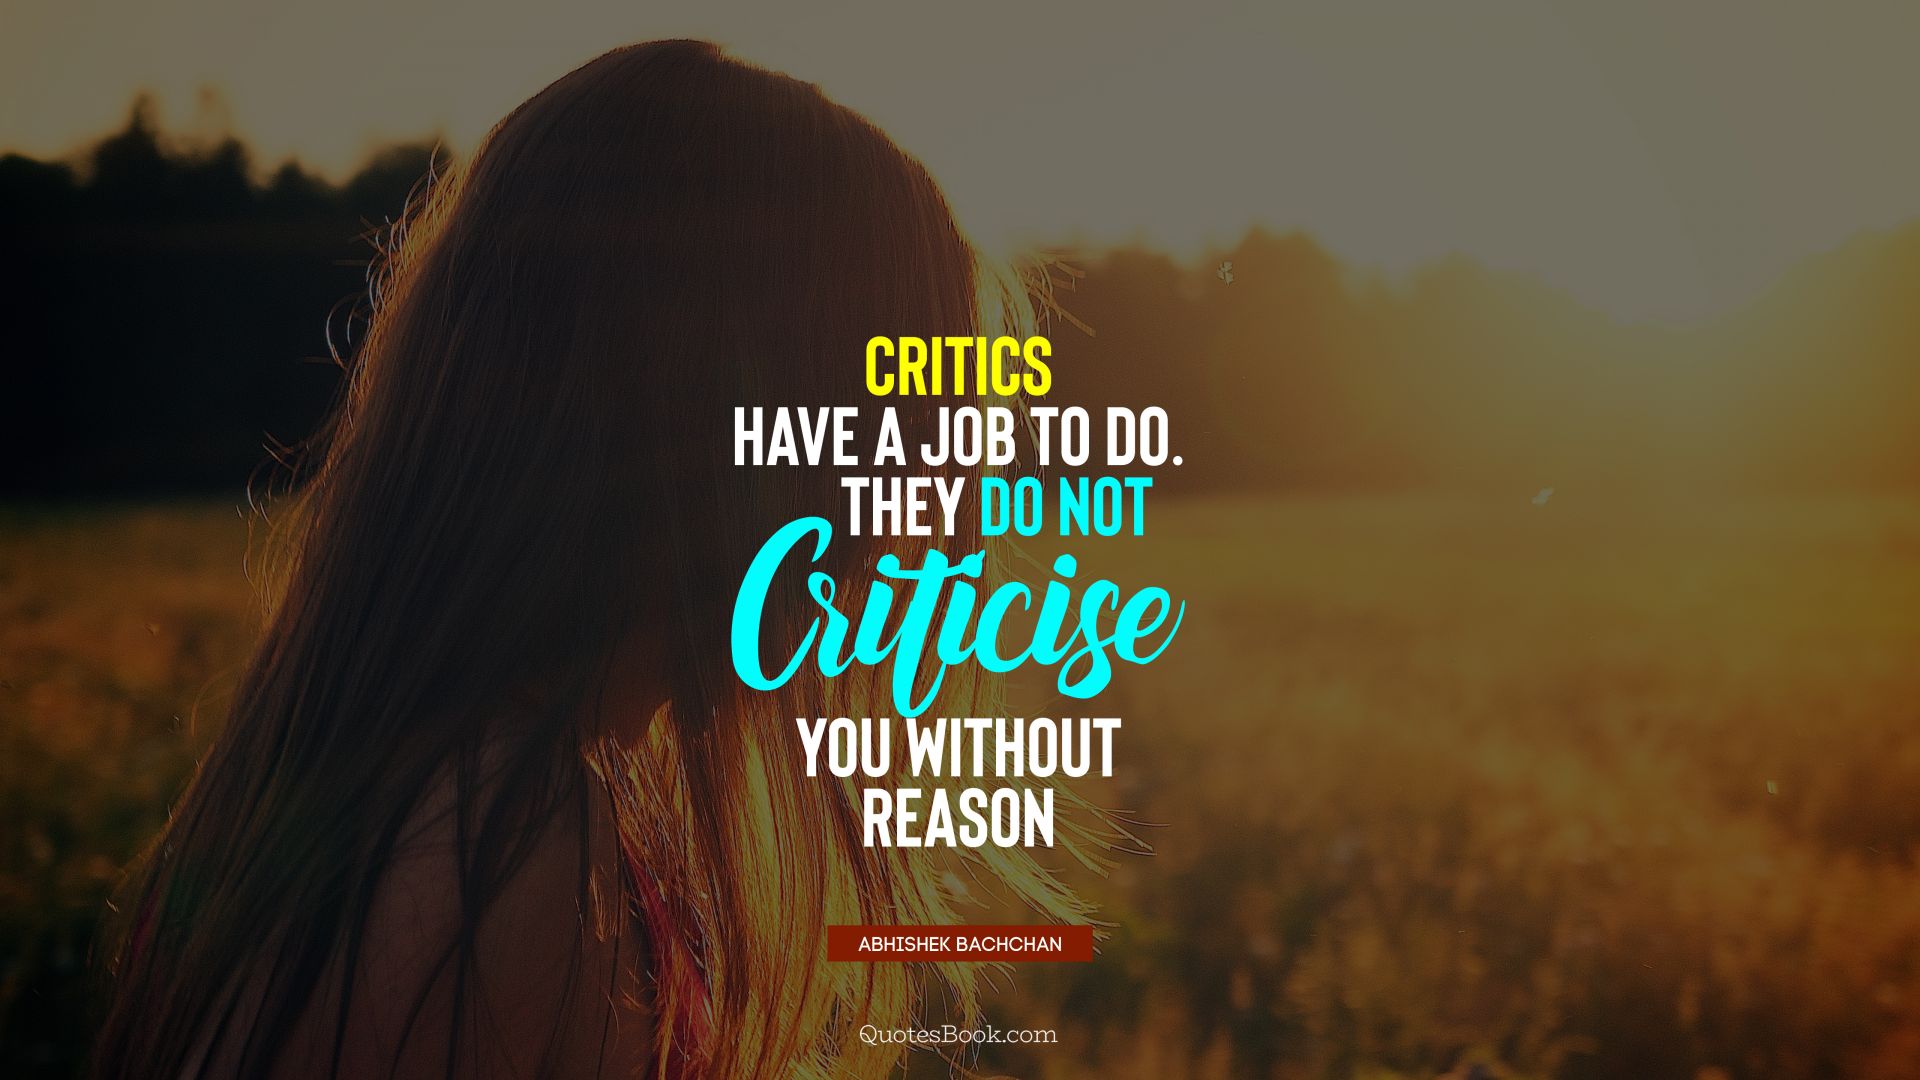 Critics have a job to do. They do not criticise you without reason. - Quote by Abhishek Bachchan